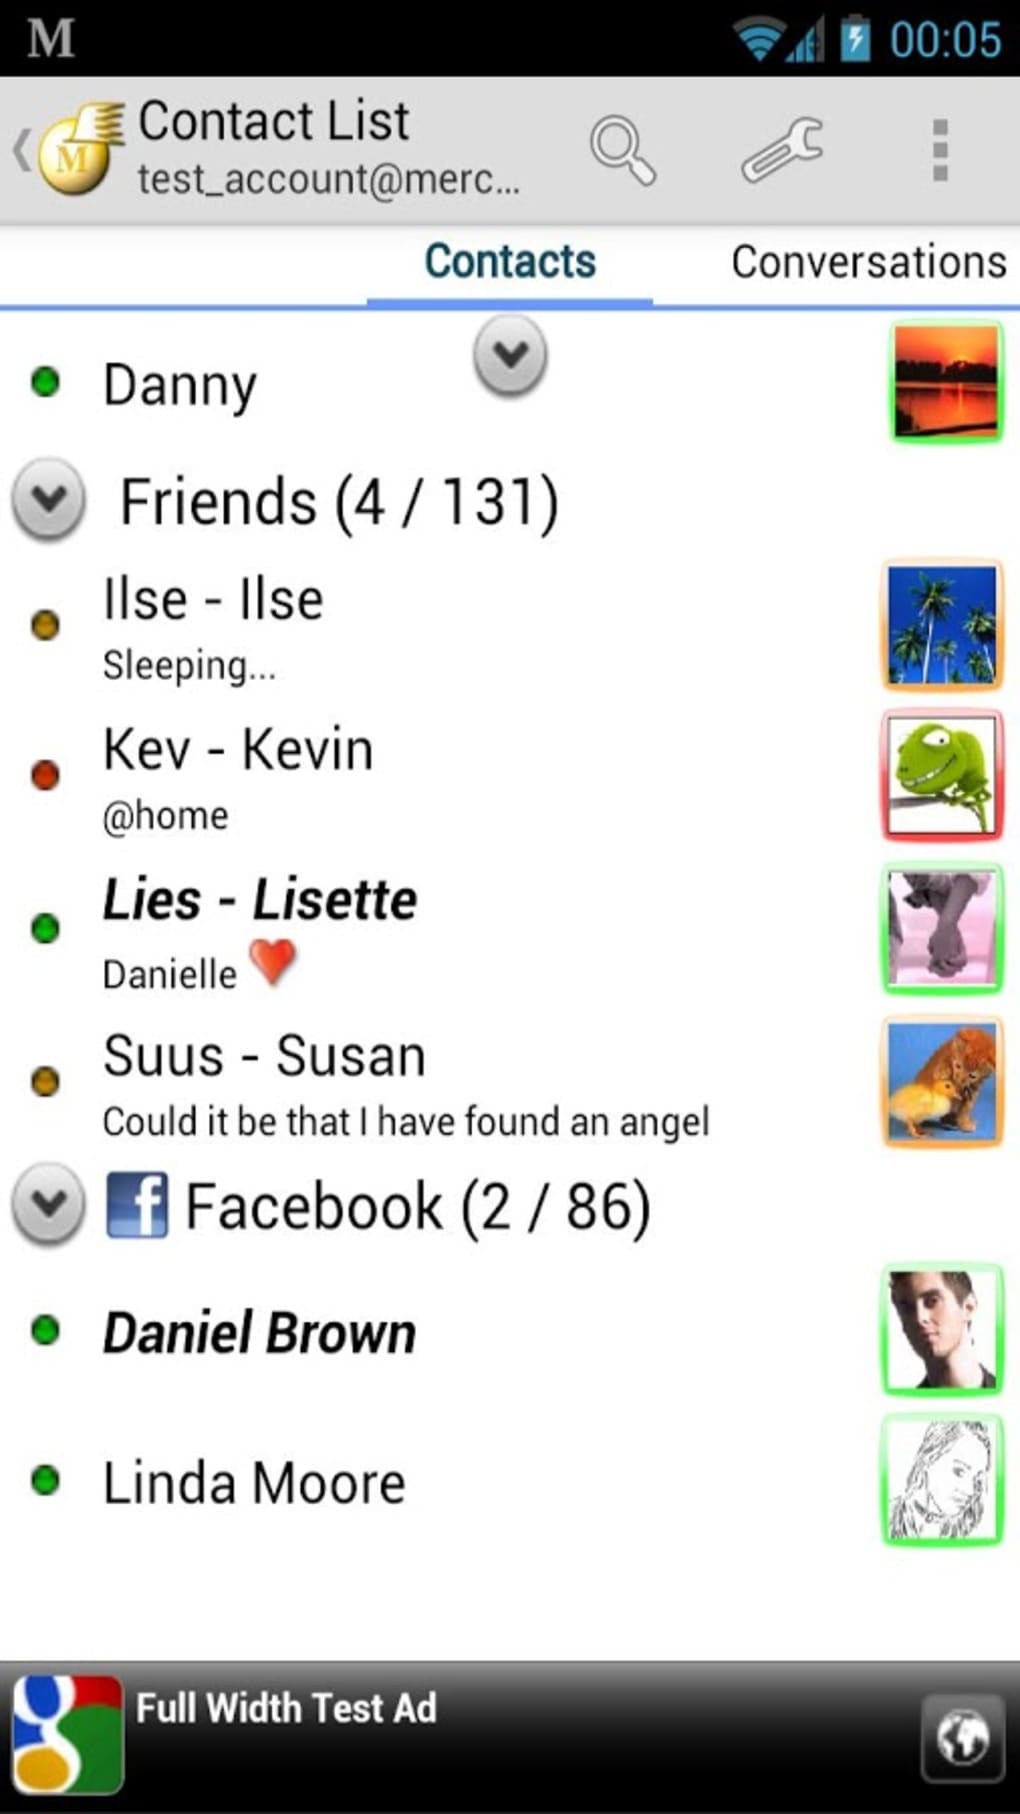 Windows live messenger msn apk free download for android